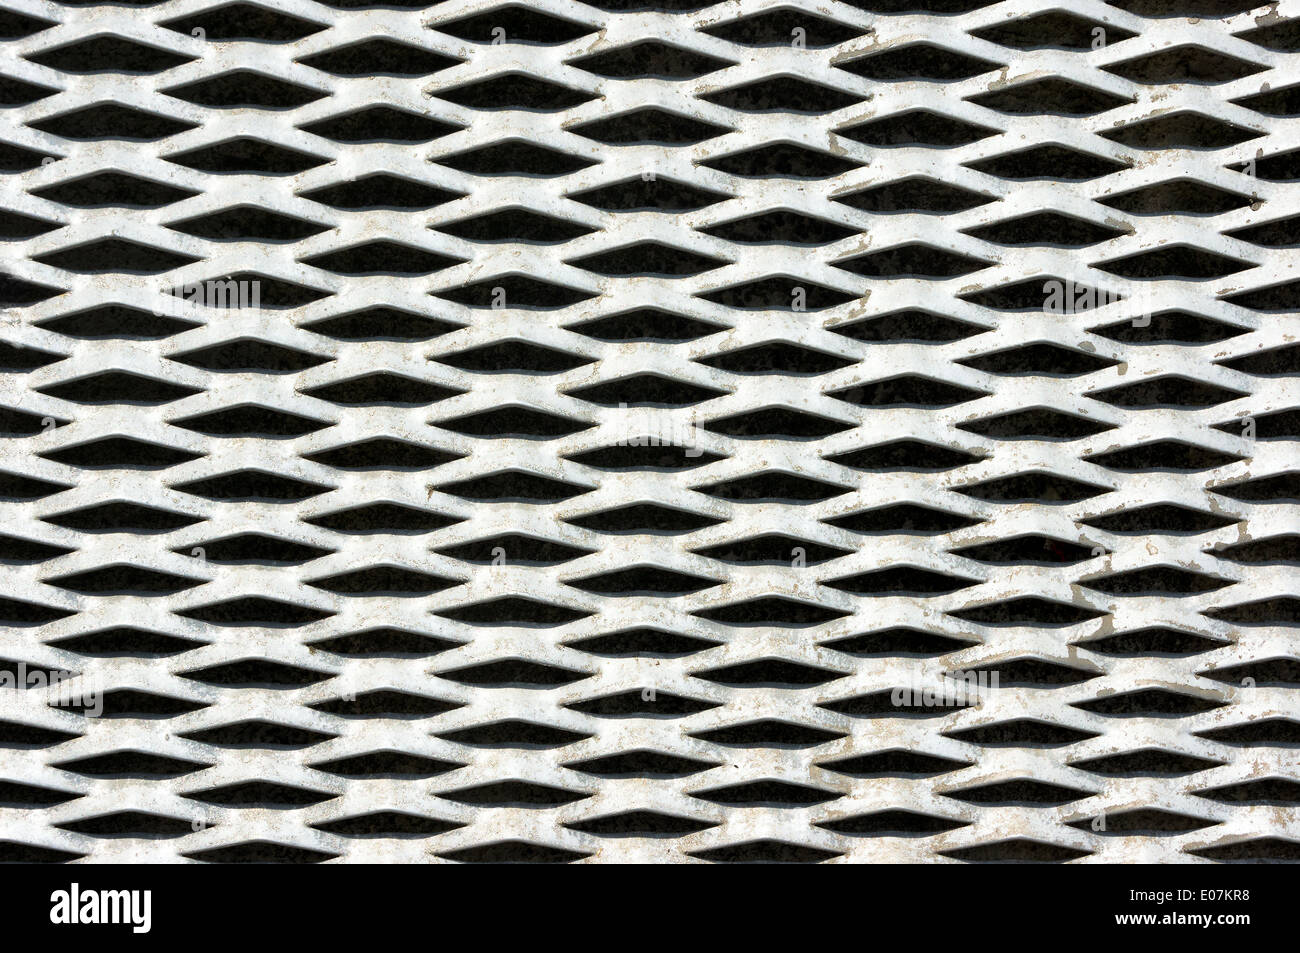 background with metallic texture pattern of grille Stock Photo